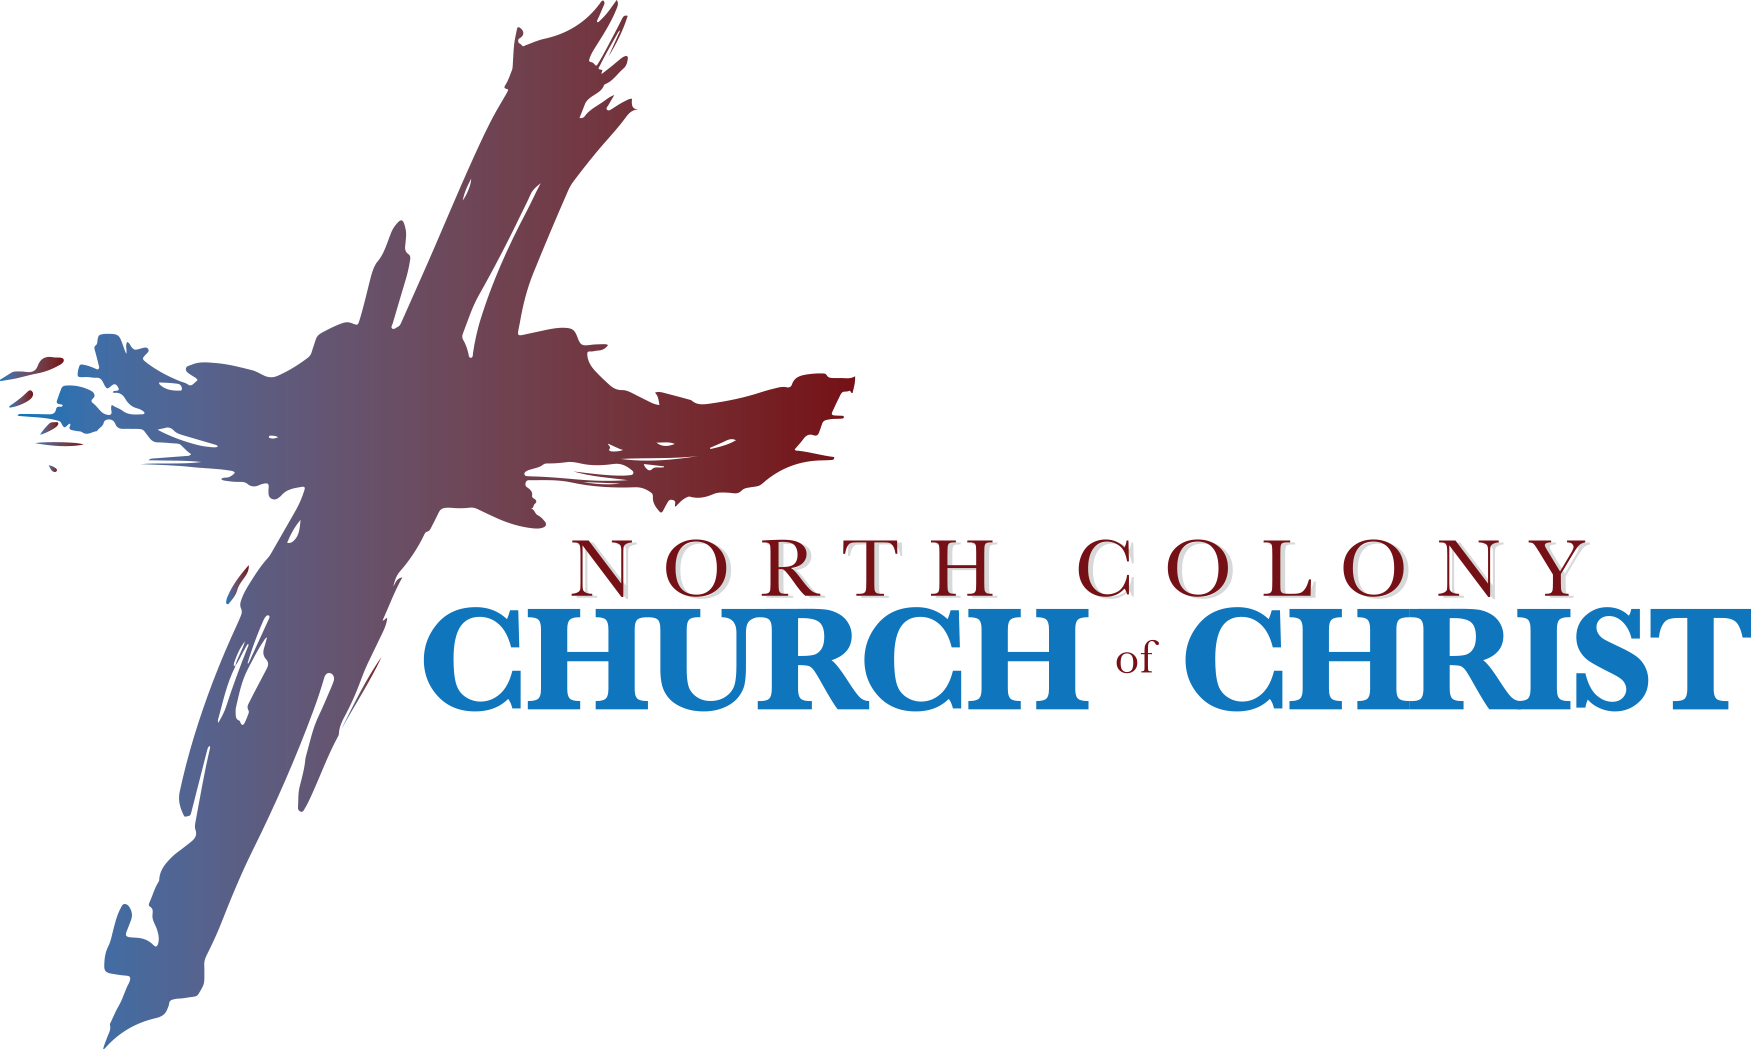 North Colony Church of Christ